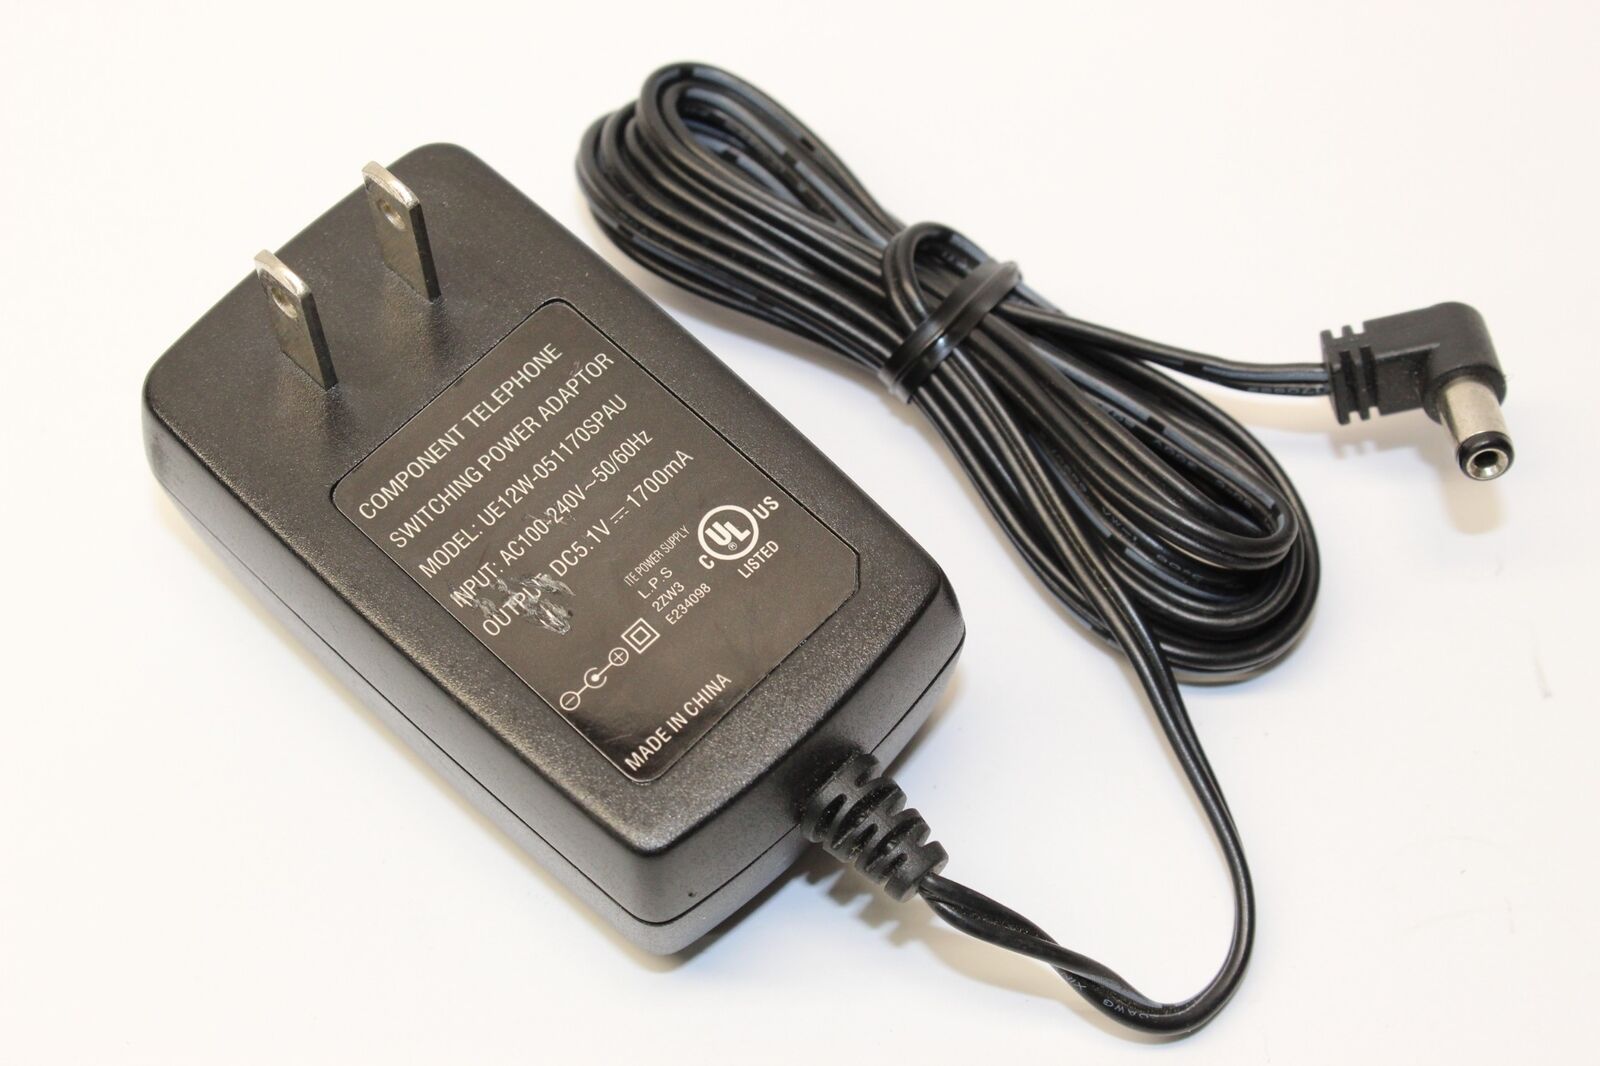 Component Telephone Switching Power AC Adapter UE12W-051170SPAU 5.1V DC 1700mA Brand: Generic Type: Adapter MPN: Do - Click Image to Close